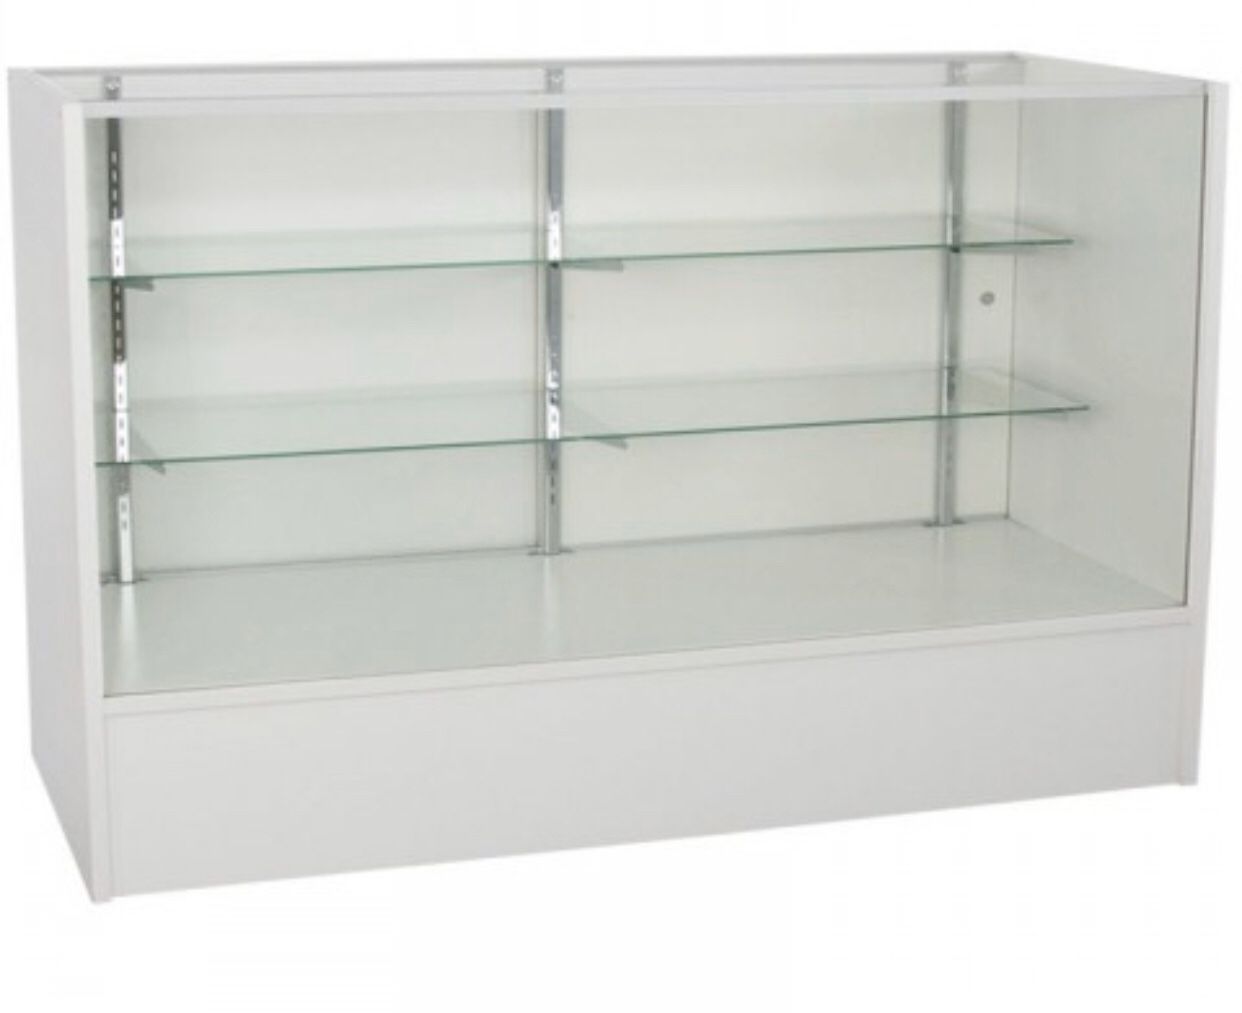 Glass counter display shelf . New have to assemble Som small damage scratches chops . That’s why price firm pick up only $100